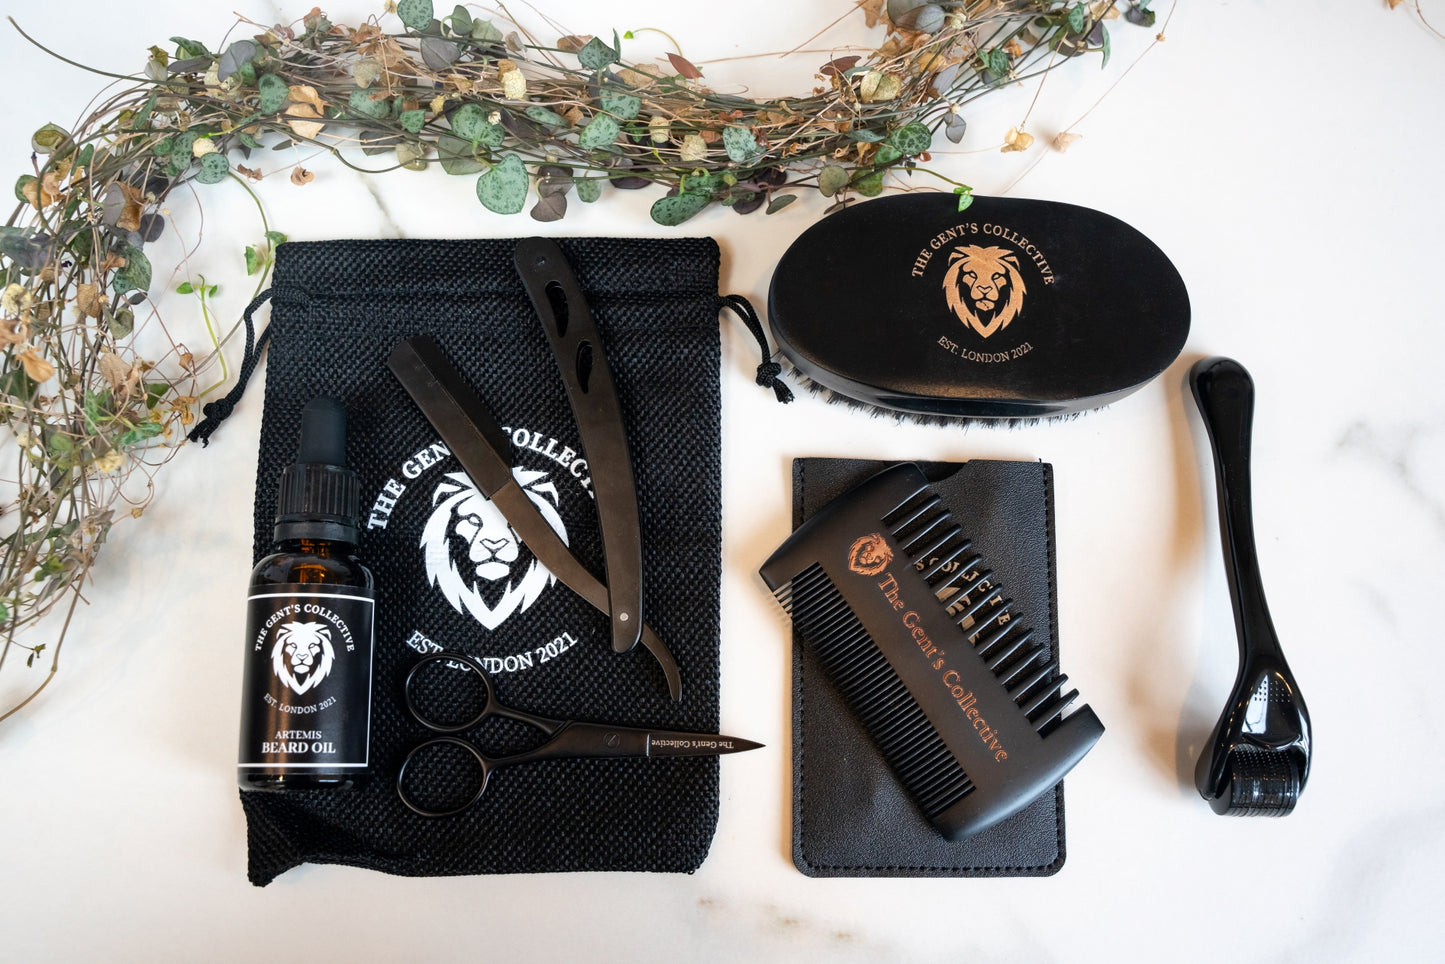 25% Off | Beard Kit - The Gent's Collective